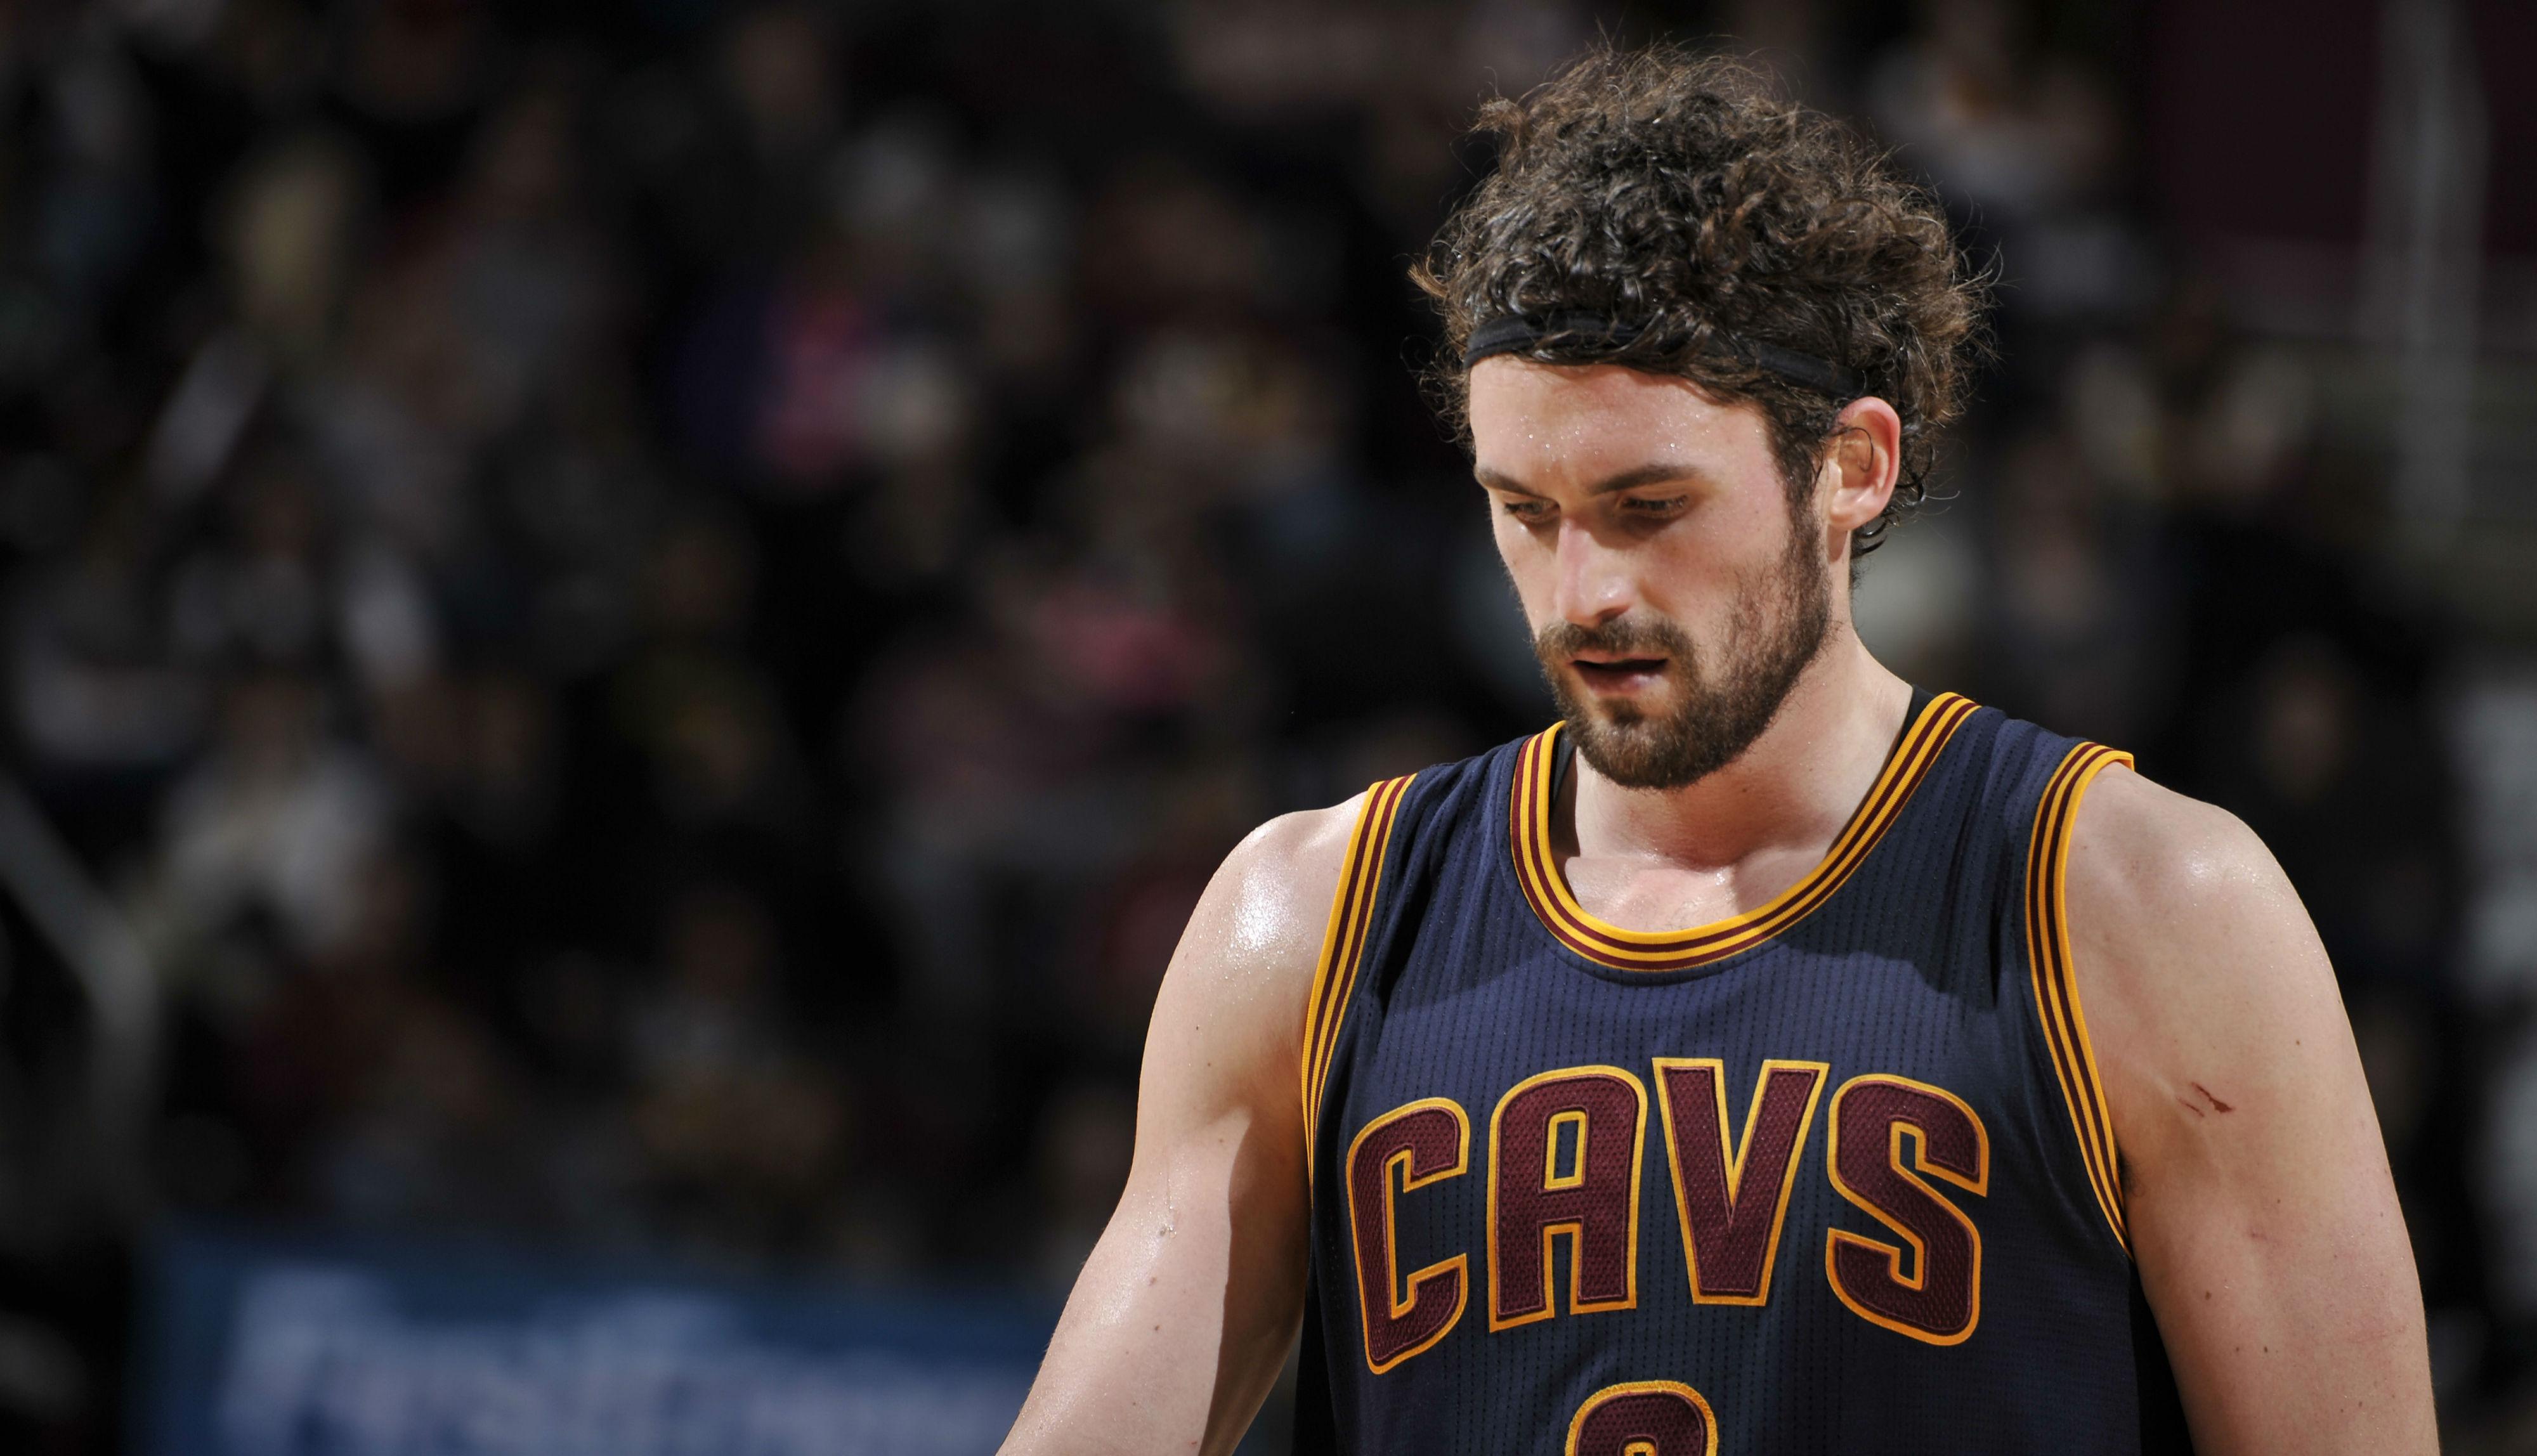 Download Kevin Love Cavs Widescreen Wallpaper 222 4000x2296 px High